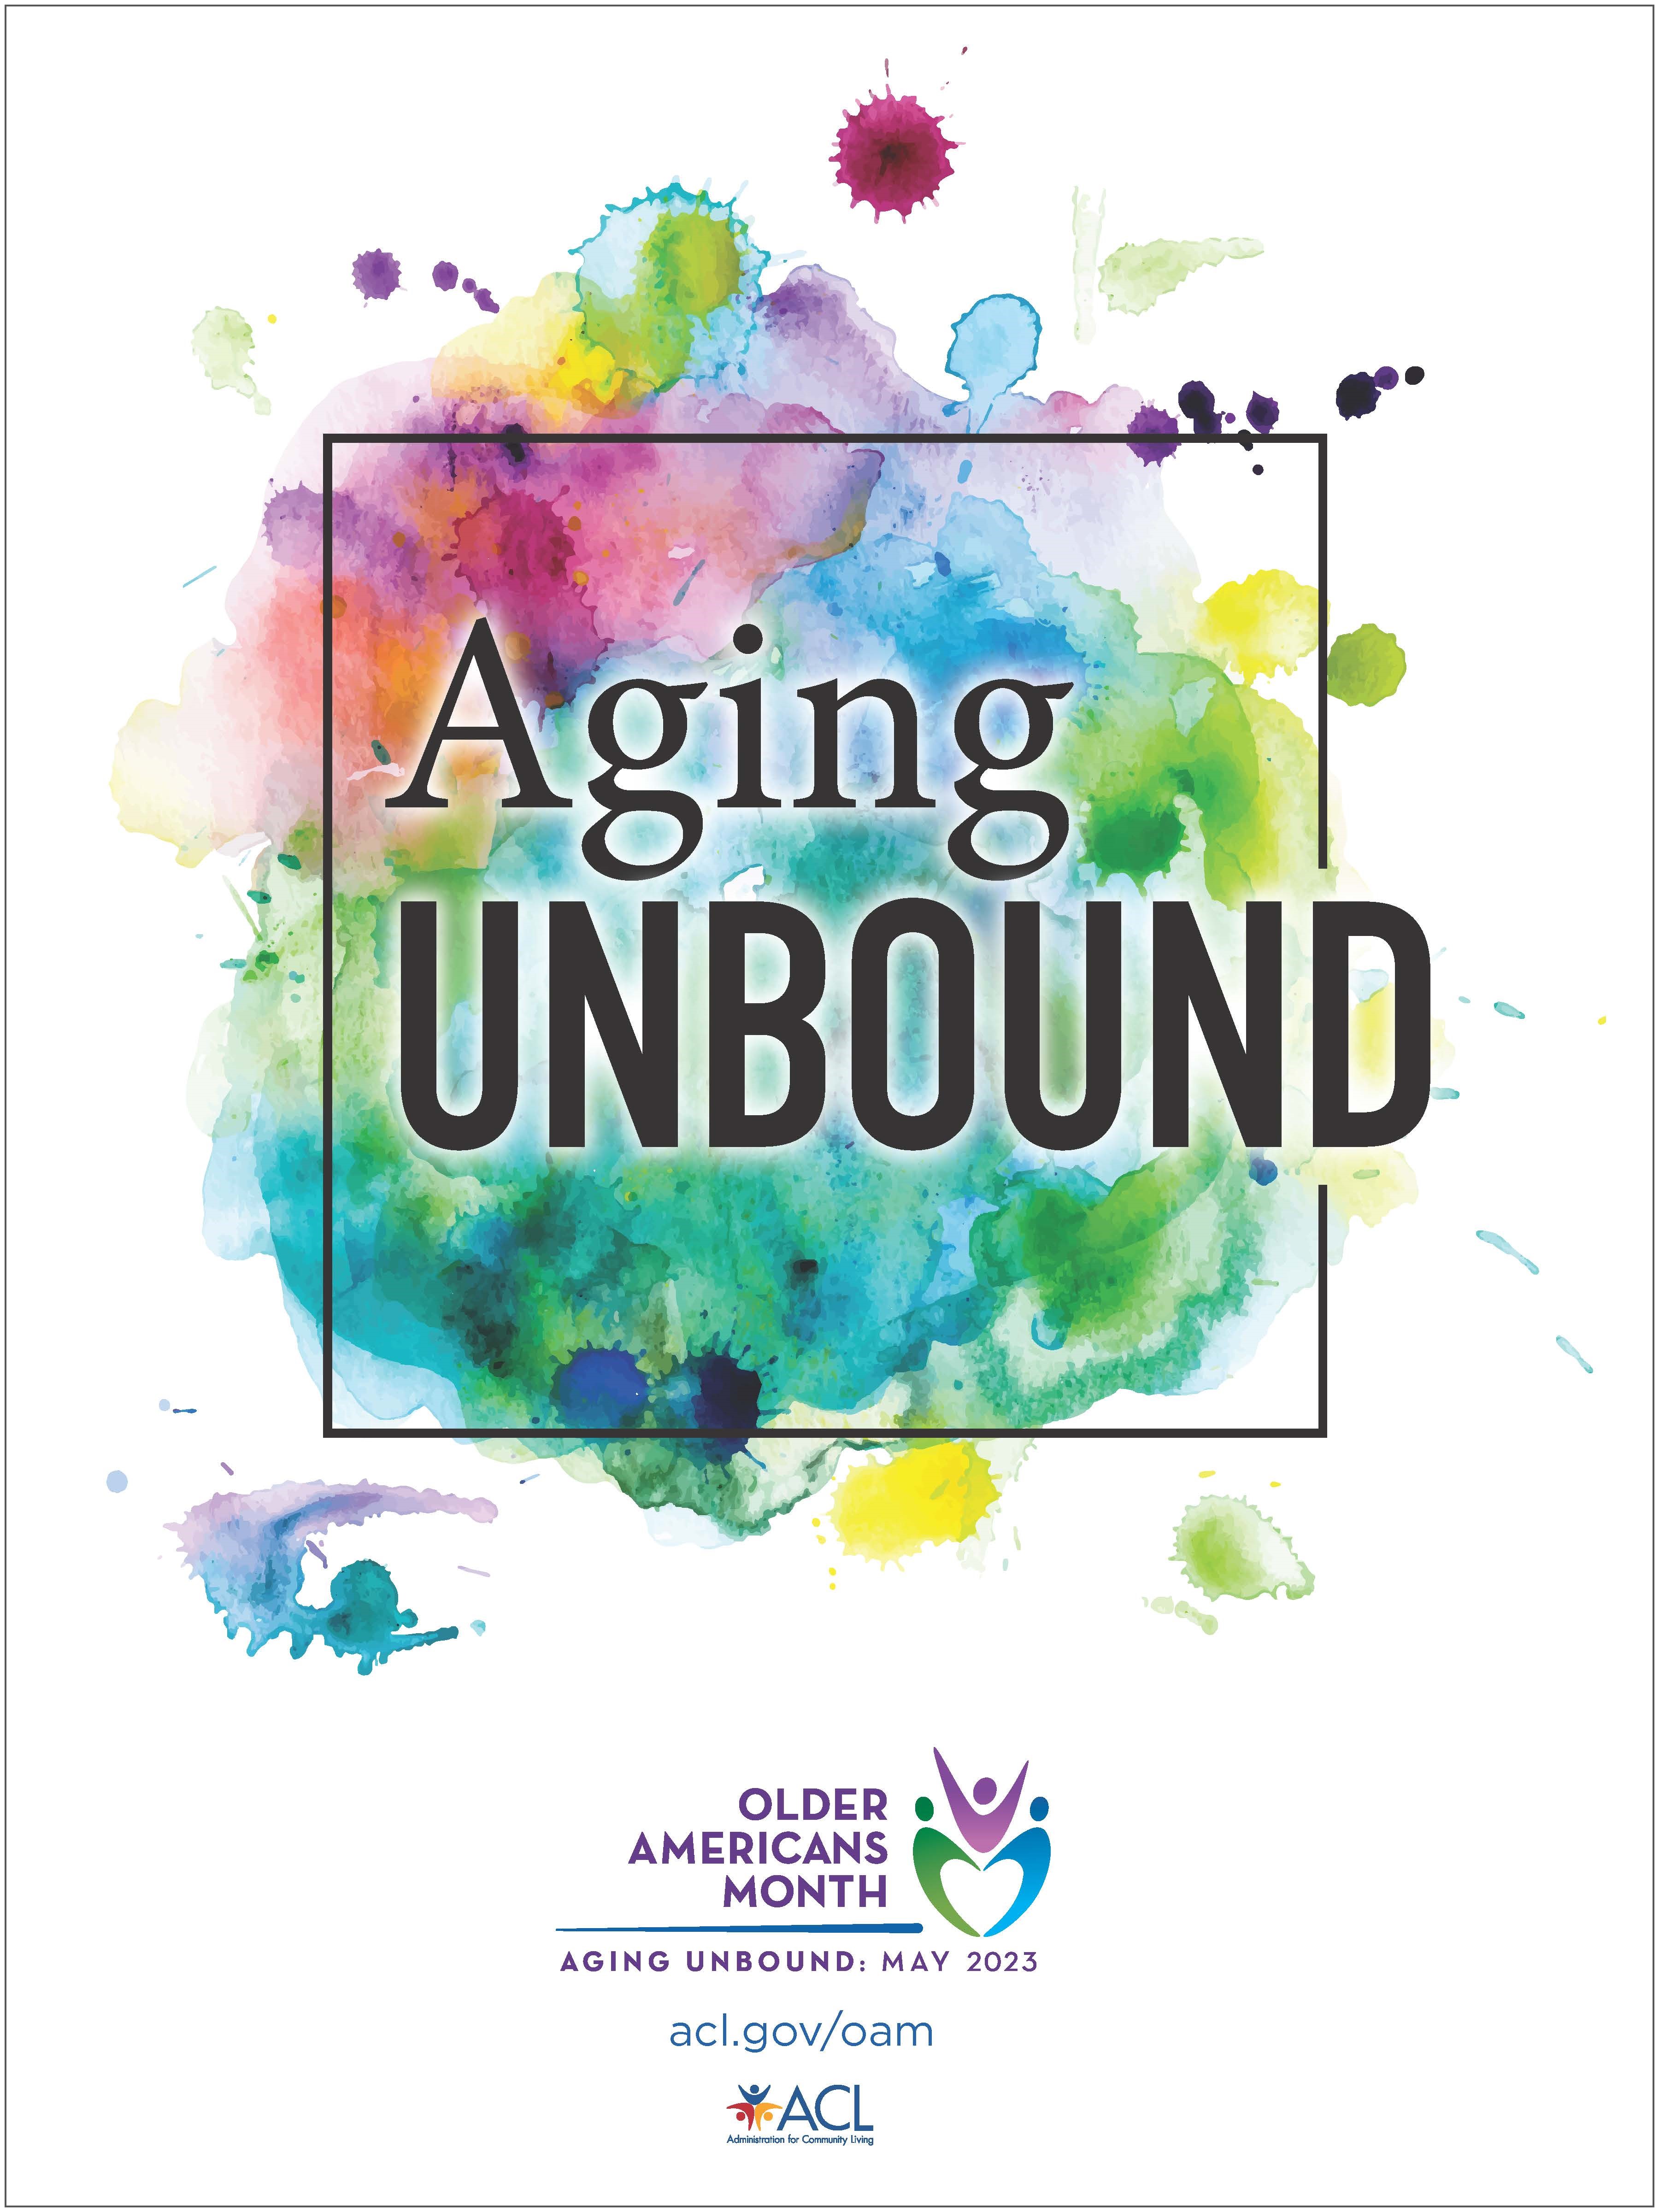 Aging Unbound. Older Americans Month: May 2023